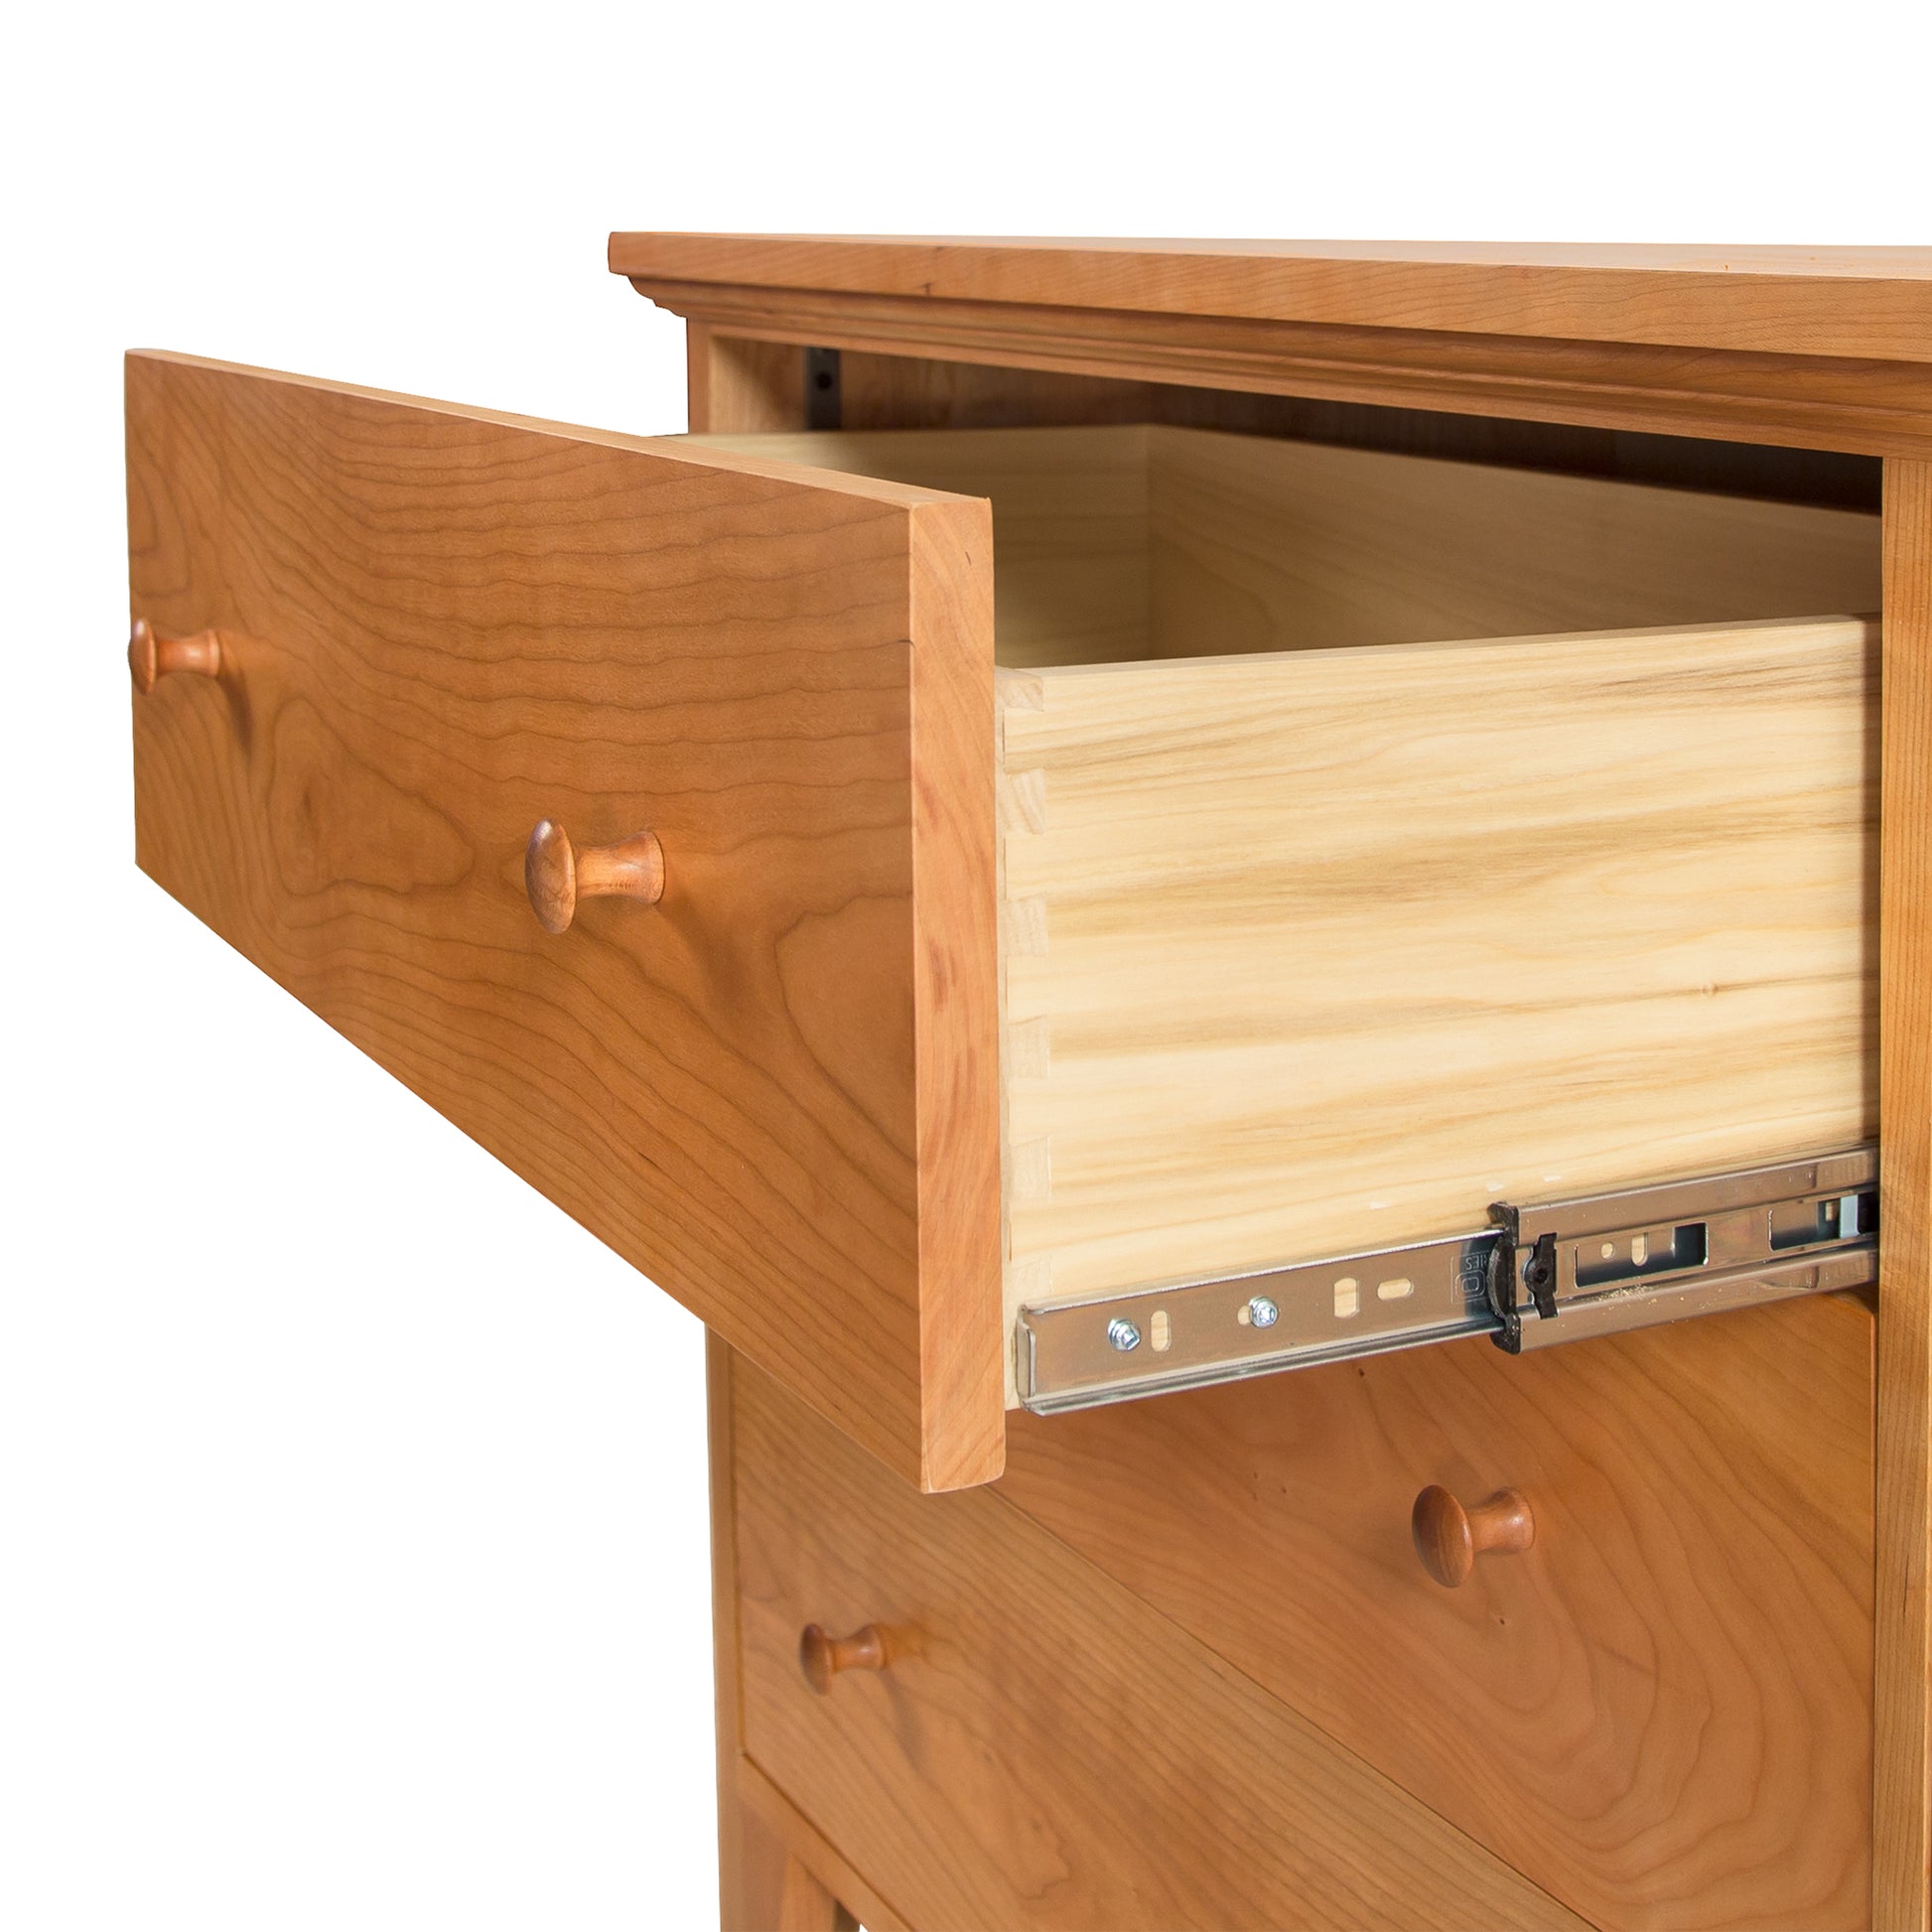 An open drawer of a Lyndon Furniture American Country 6-Drawer Dresser - Floor Model, showcasing its smooth, light-colored interior and sturdy dovetail joints, with a focus on the metal sliding mechanism.